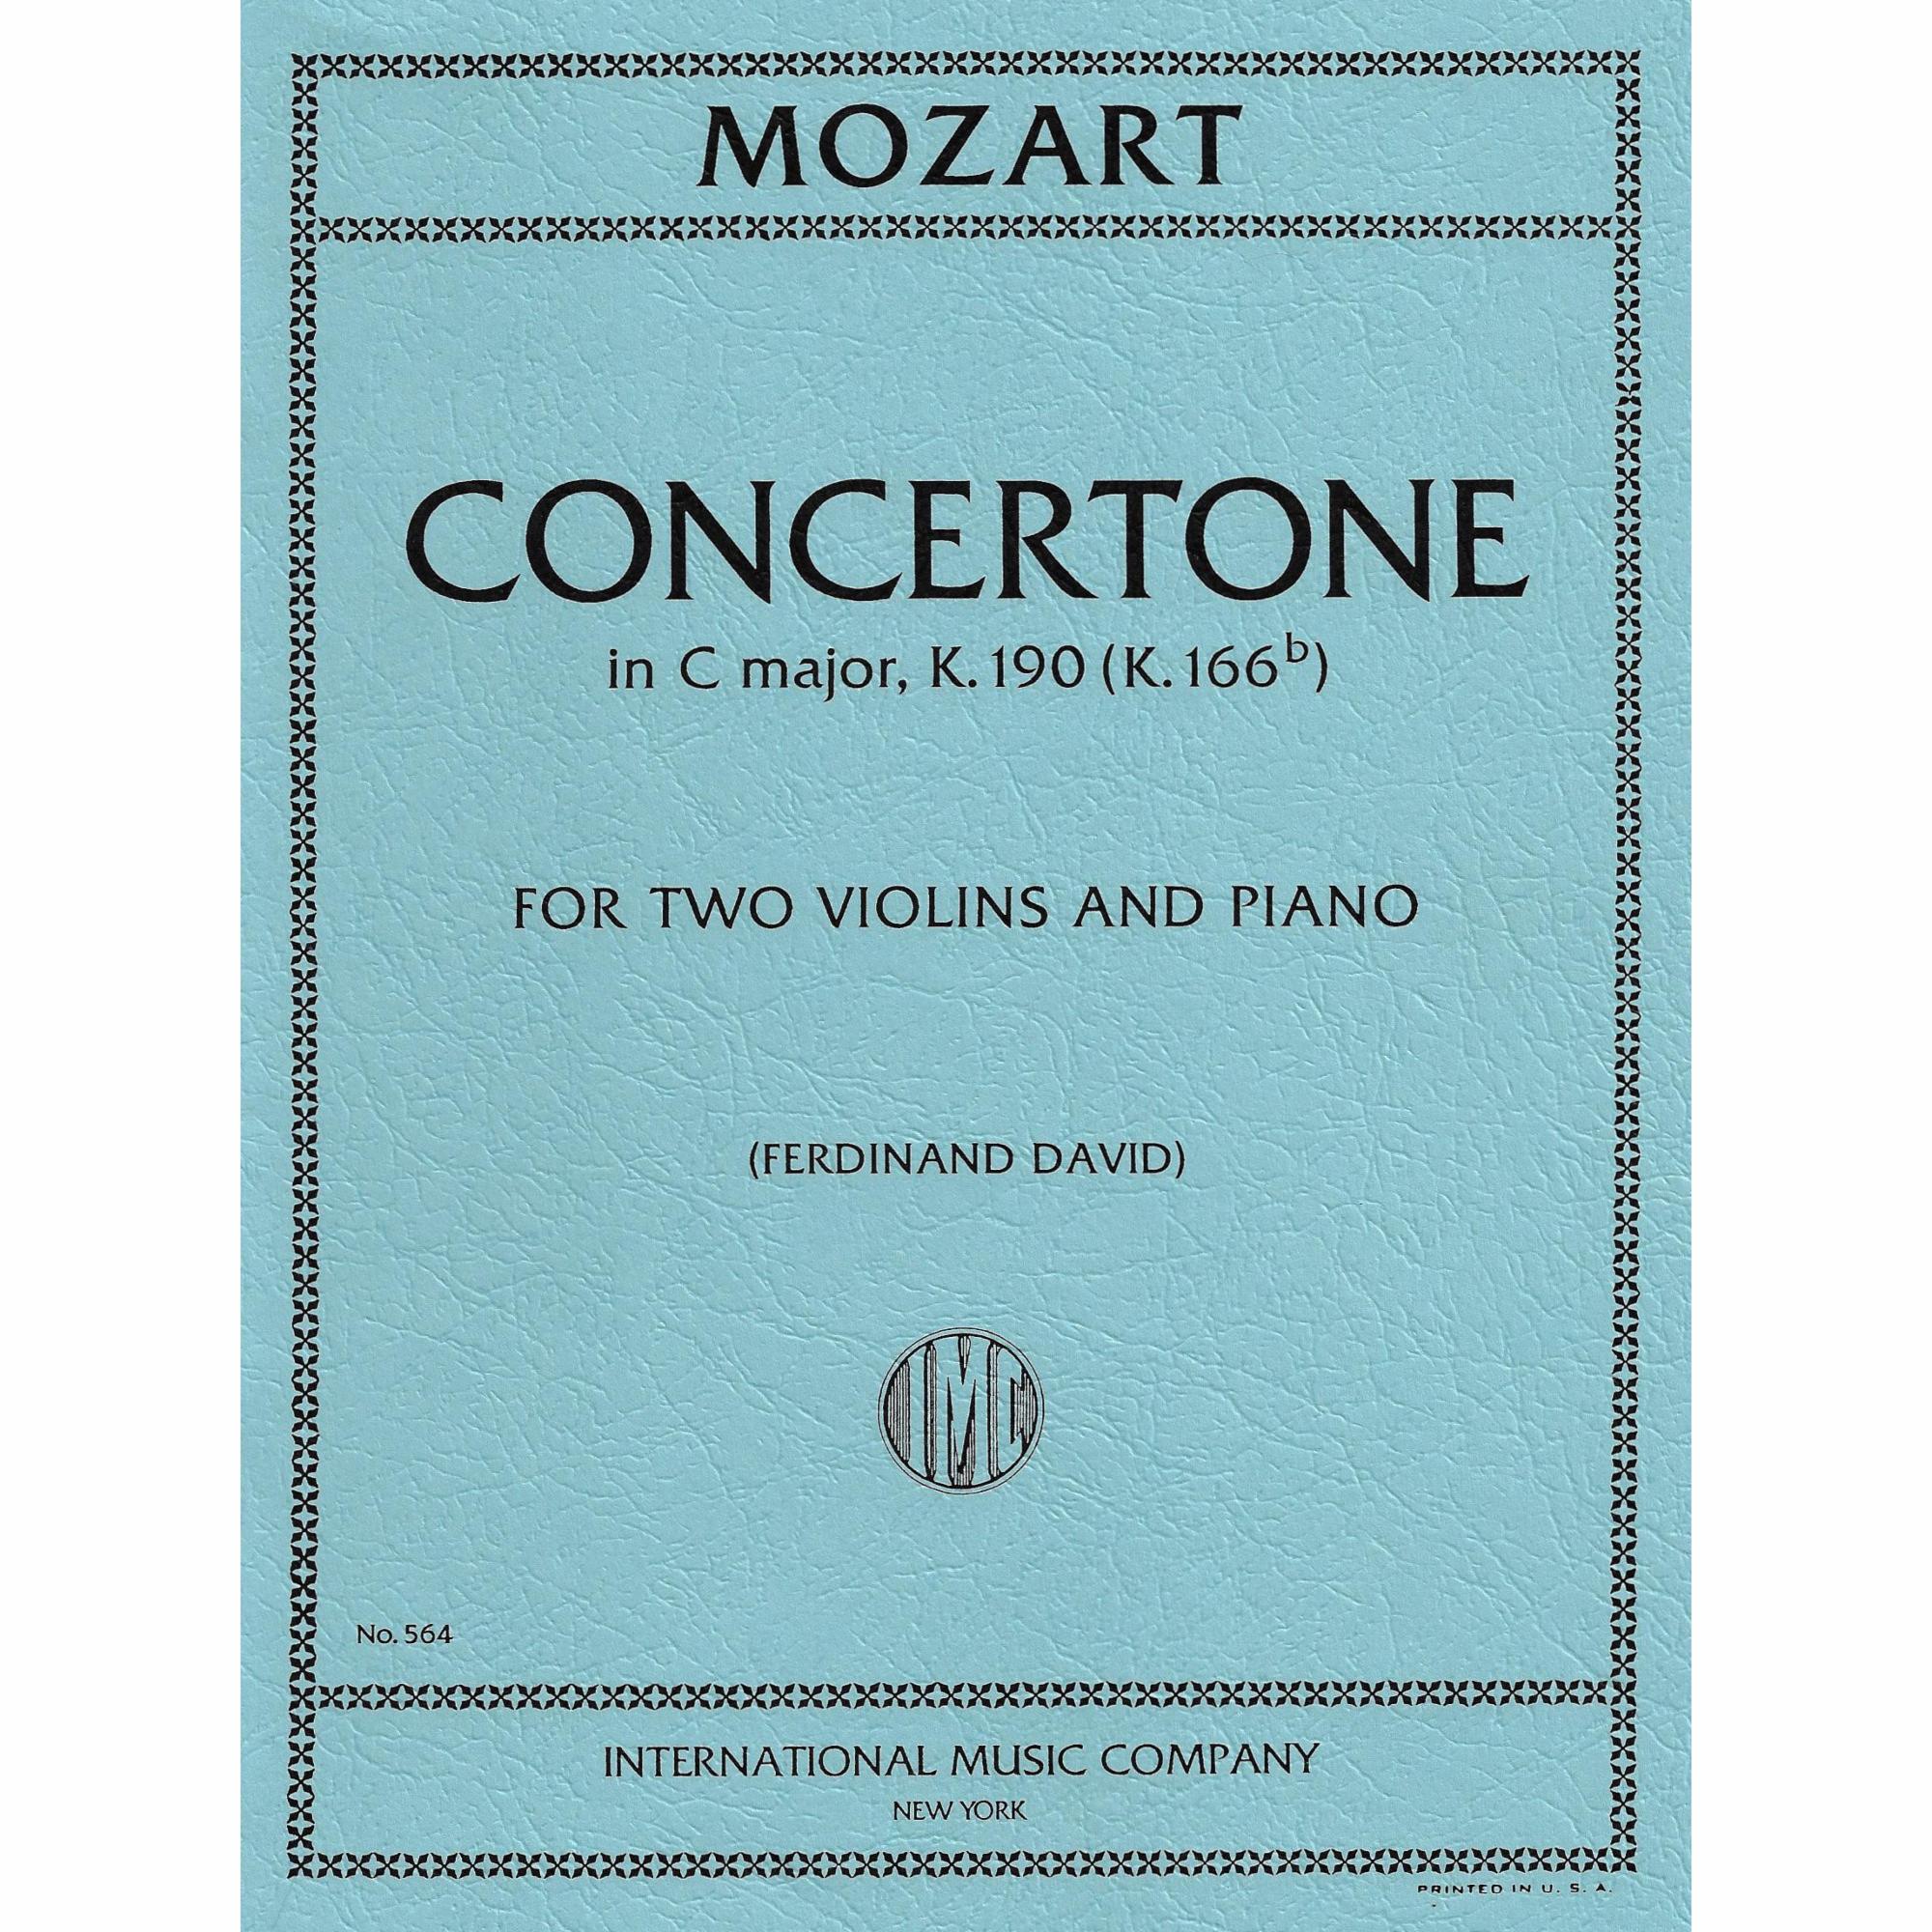 Mozart -- Concertone in C Major, K. 190 for Two Violins and Piano